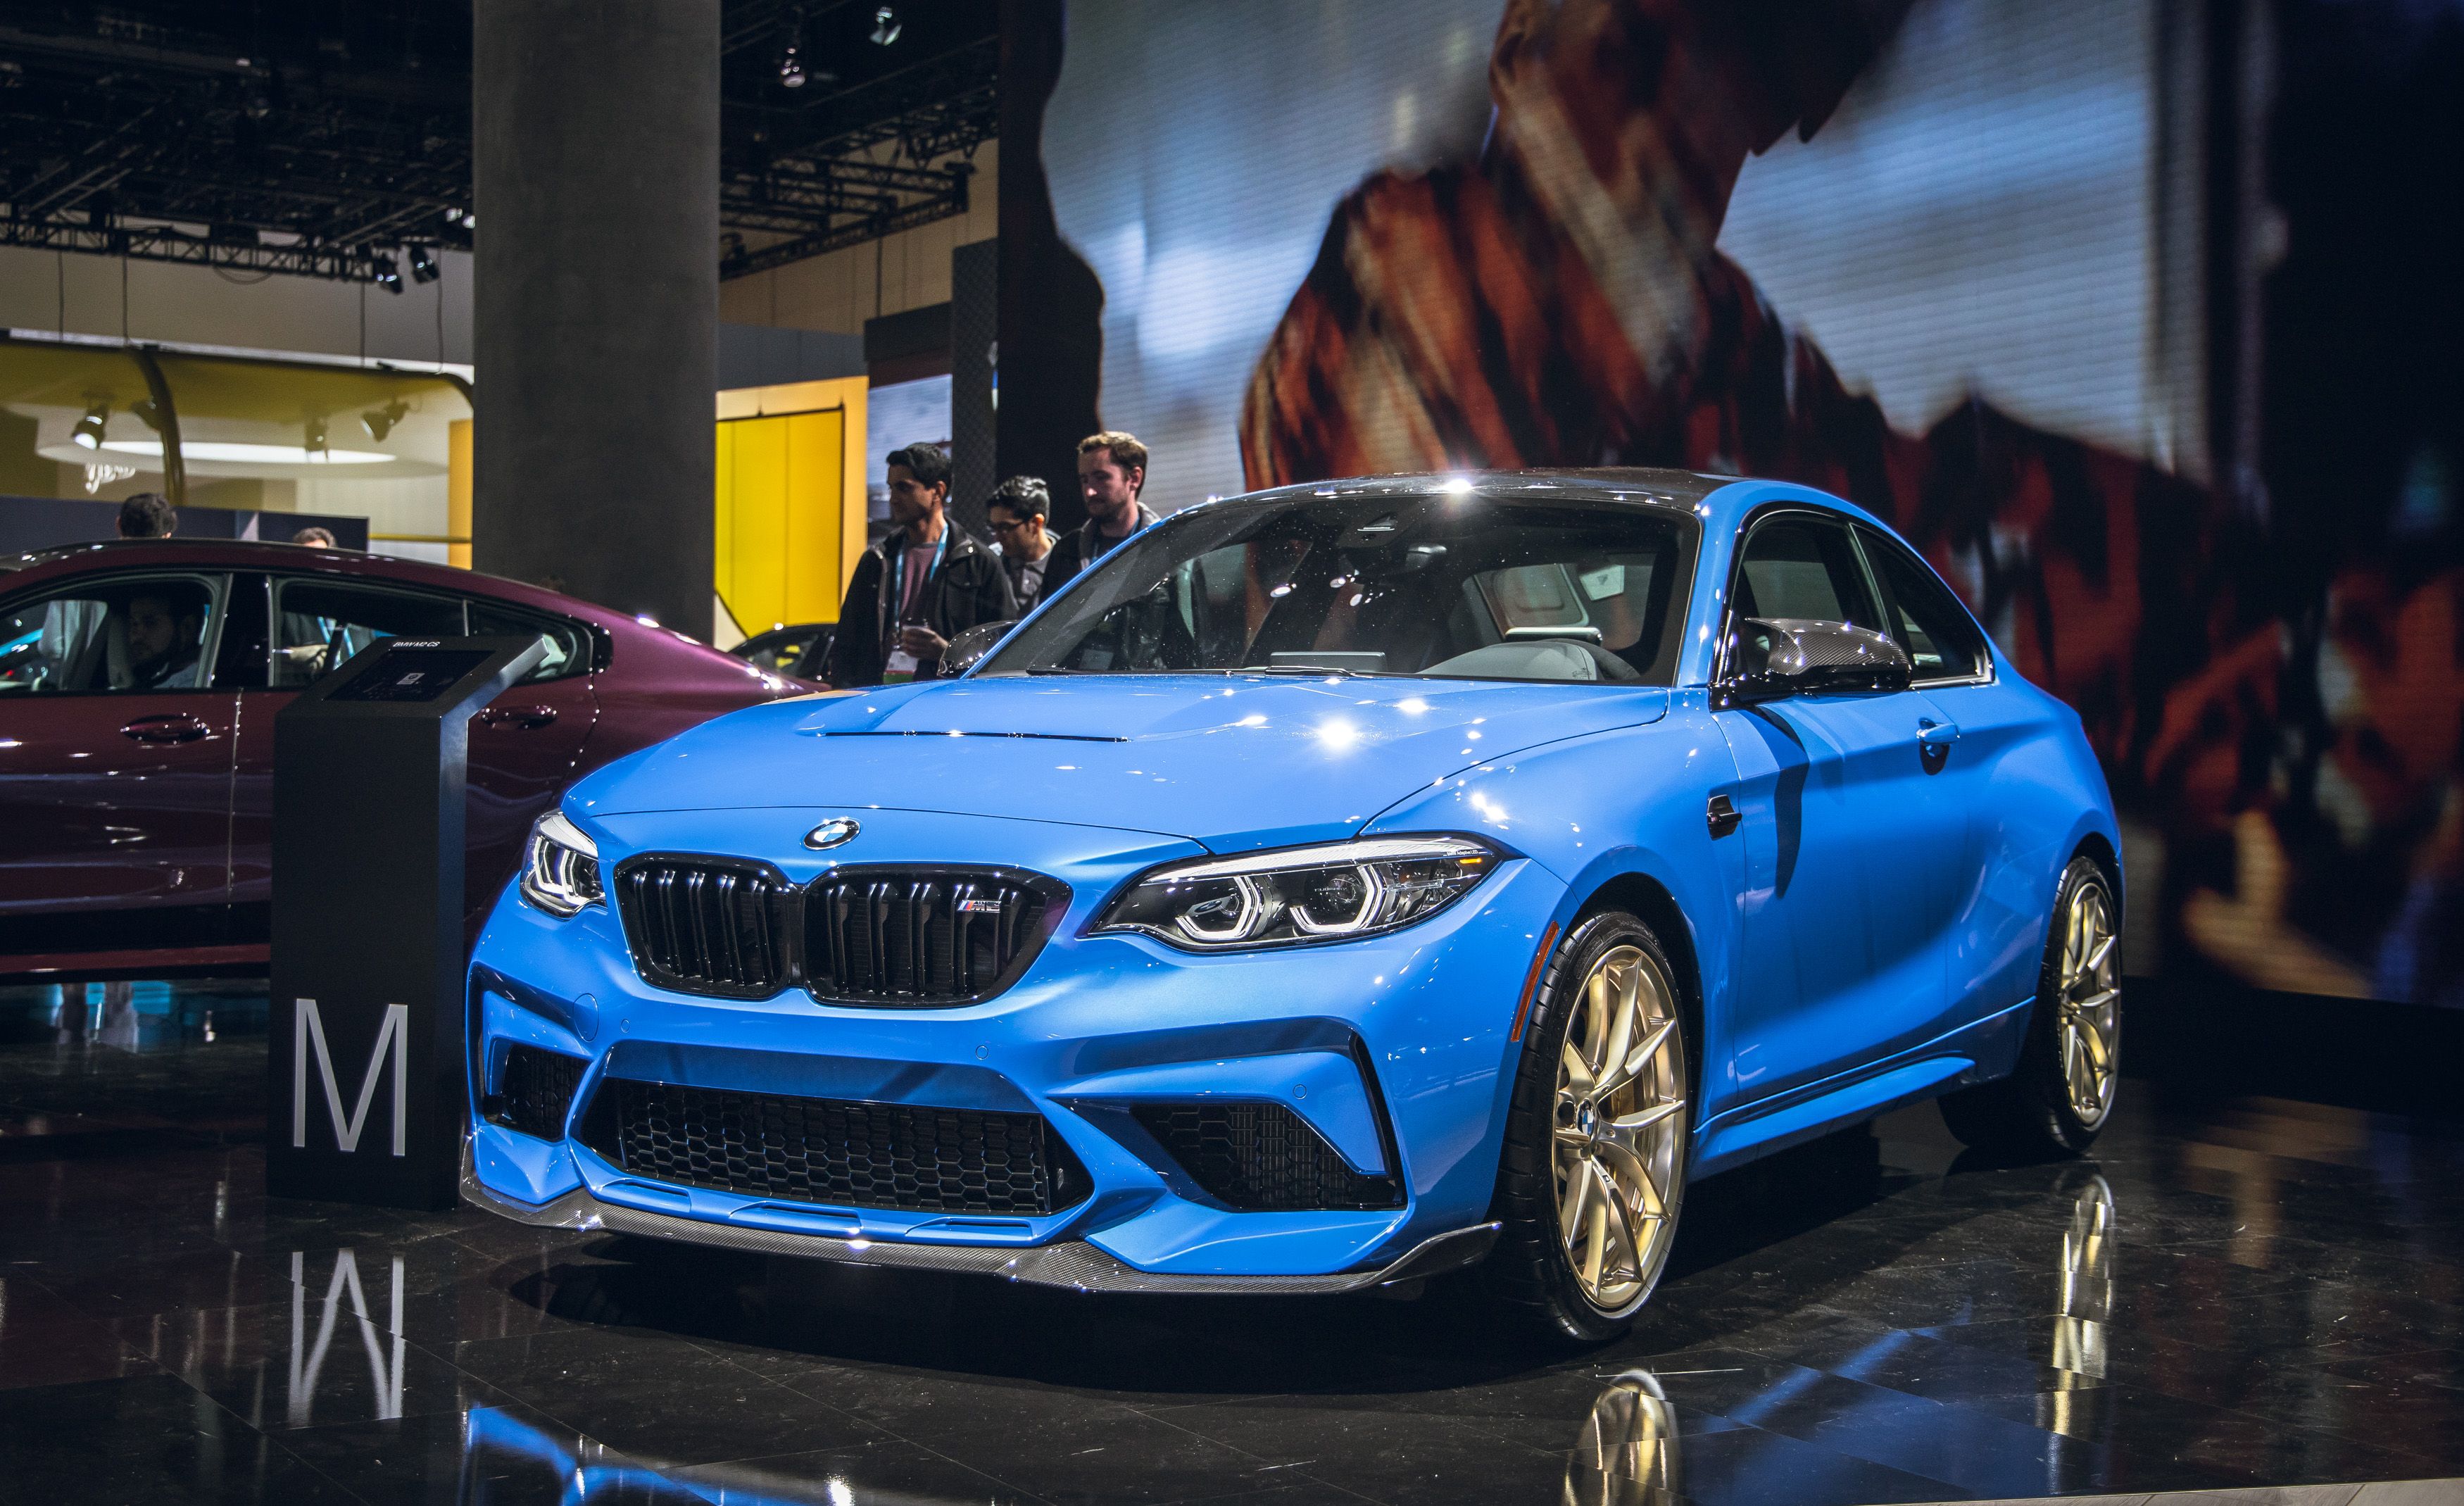 How rare is a BMW M2?